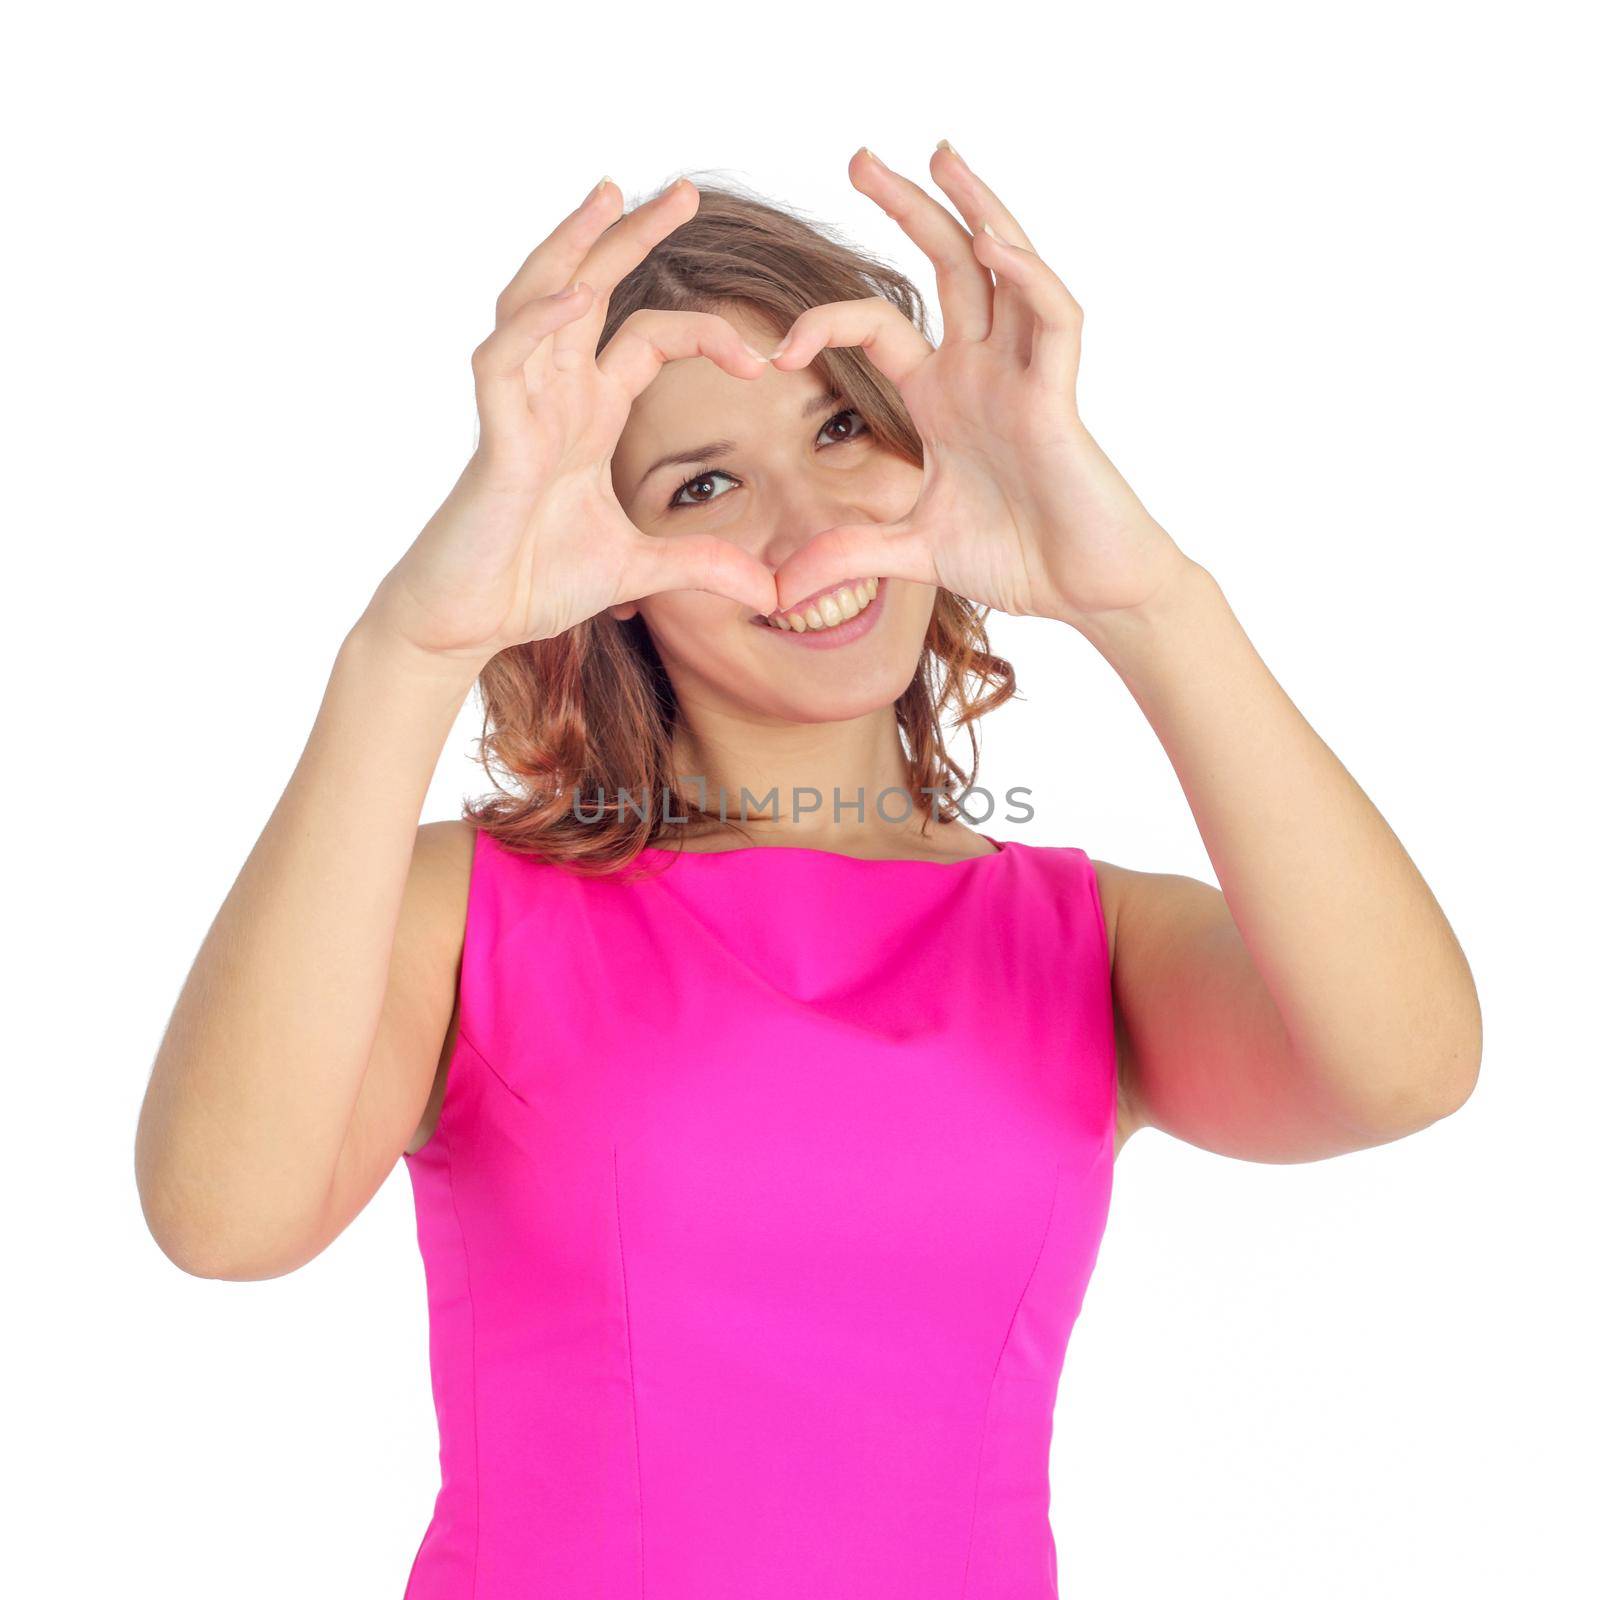 pretty young girl making a heart symbol with her hands, focus on the hands